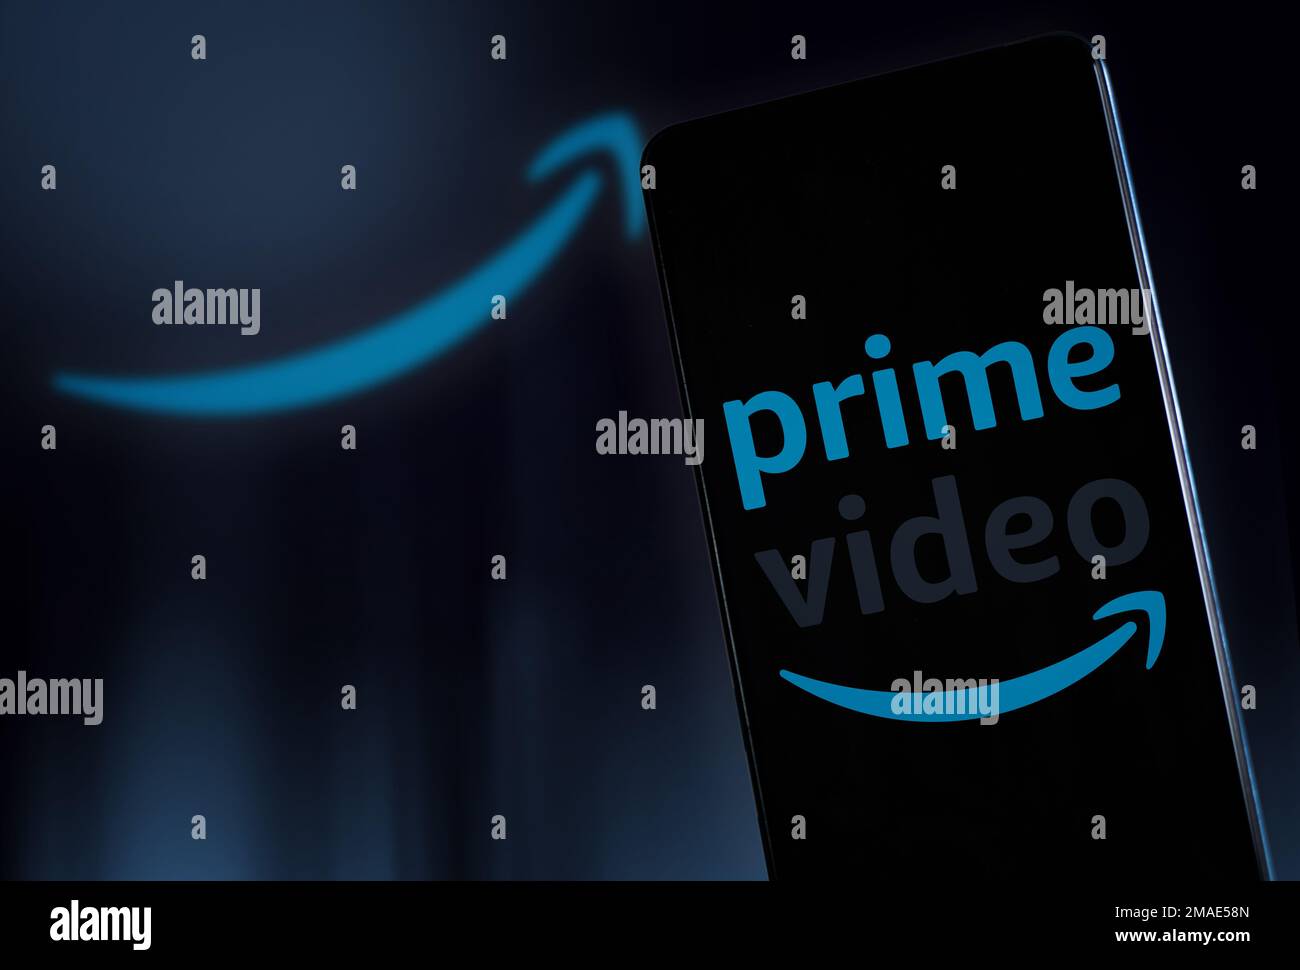 Amazon Primeu200bVideo logo on smartphone and background